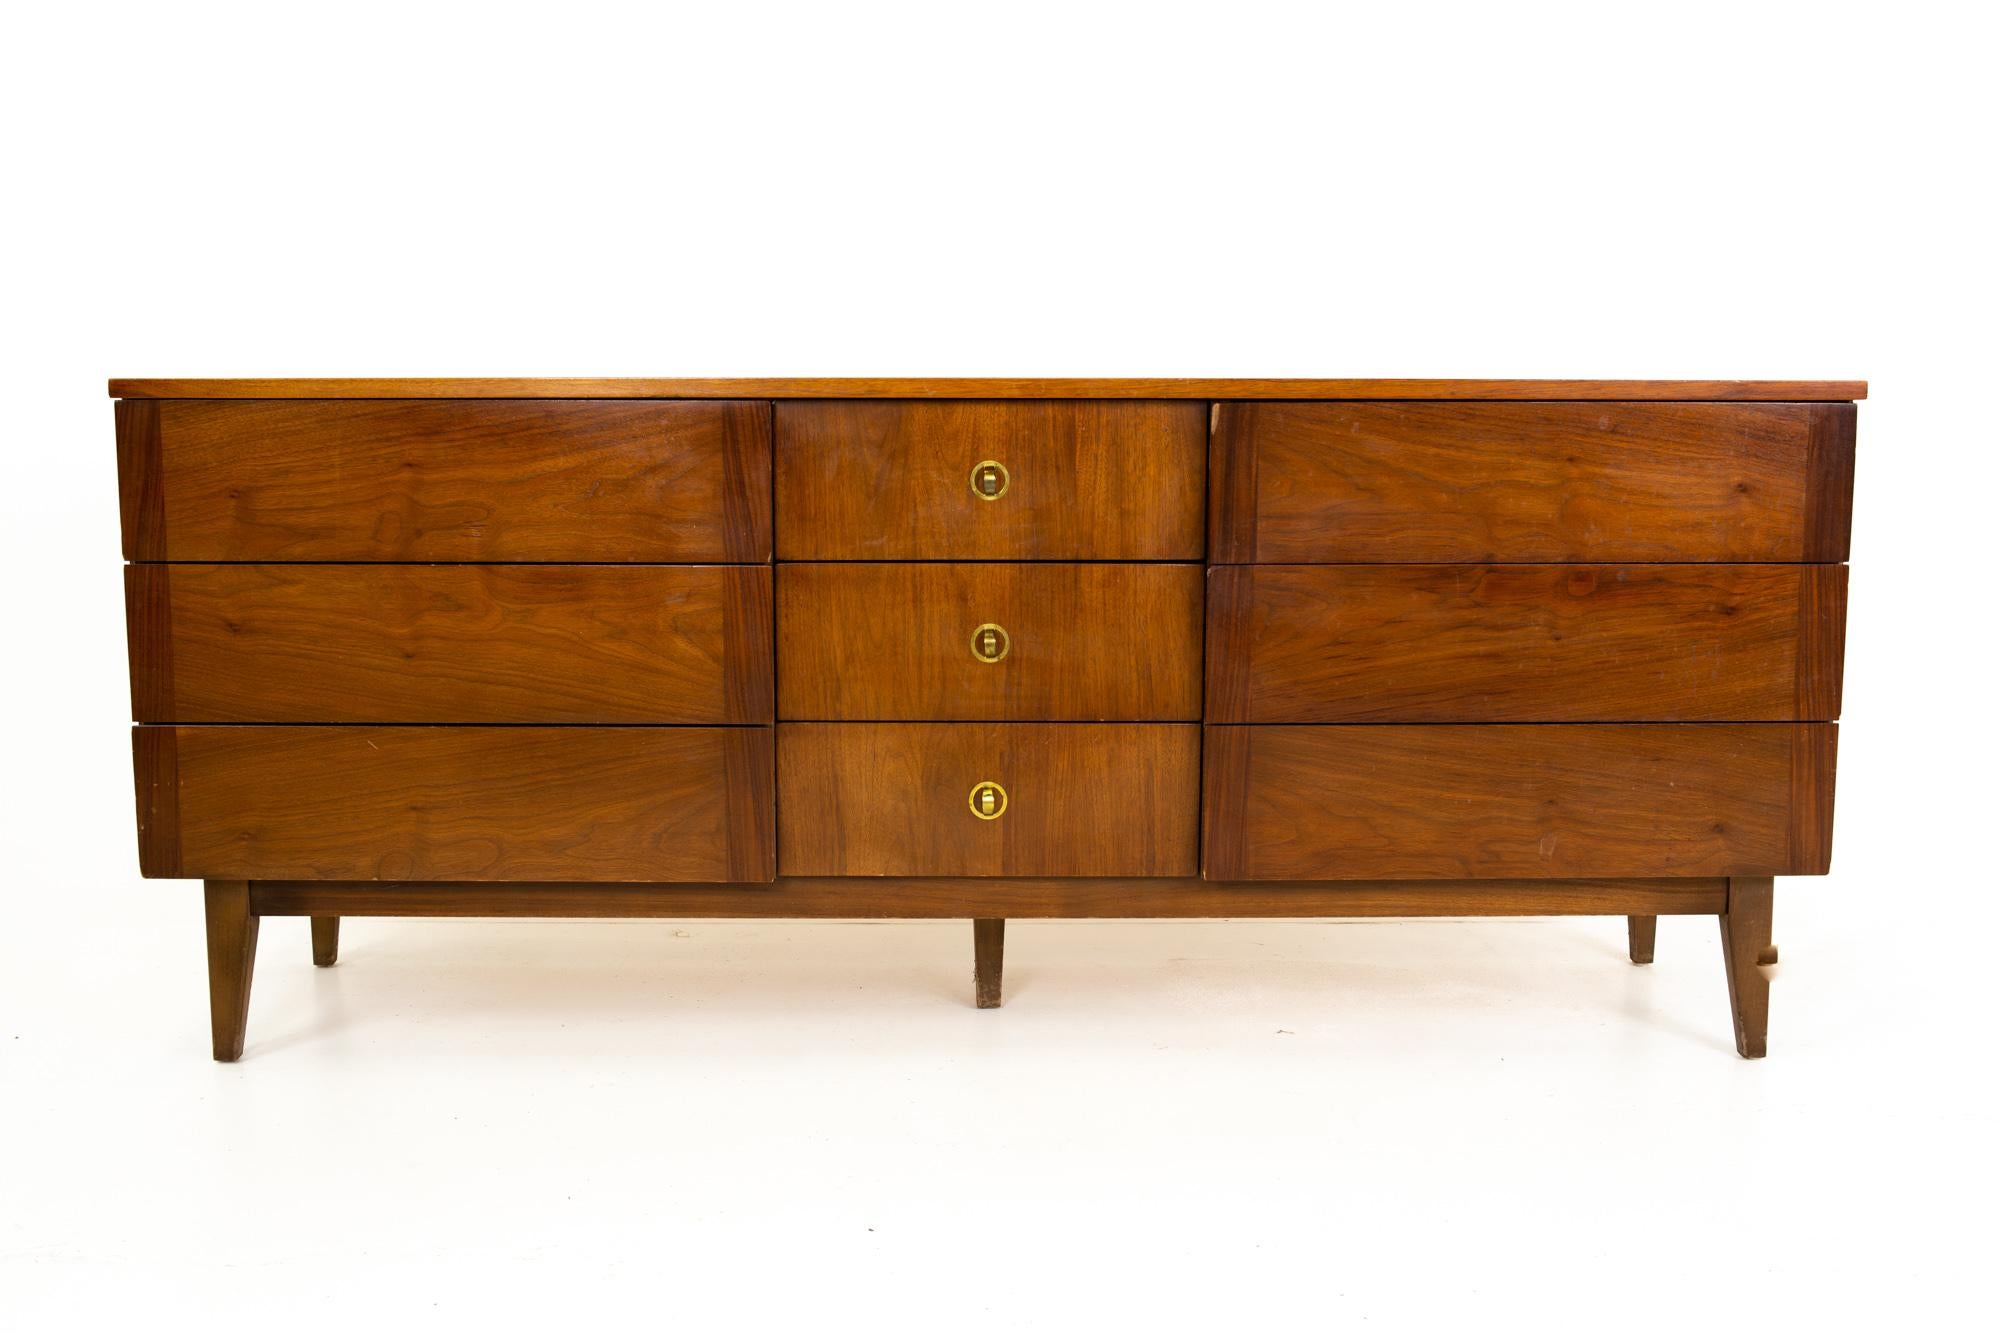 Stanley mid century walnut and brass 9 drawer lowboy dresser

Dresser measures: 72 wide x 18 deep x 30 inches high

All pieces of furniture can be had in what we call restored vintage condition. That means the piece is restored upon purchase so